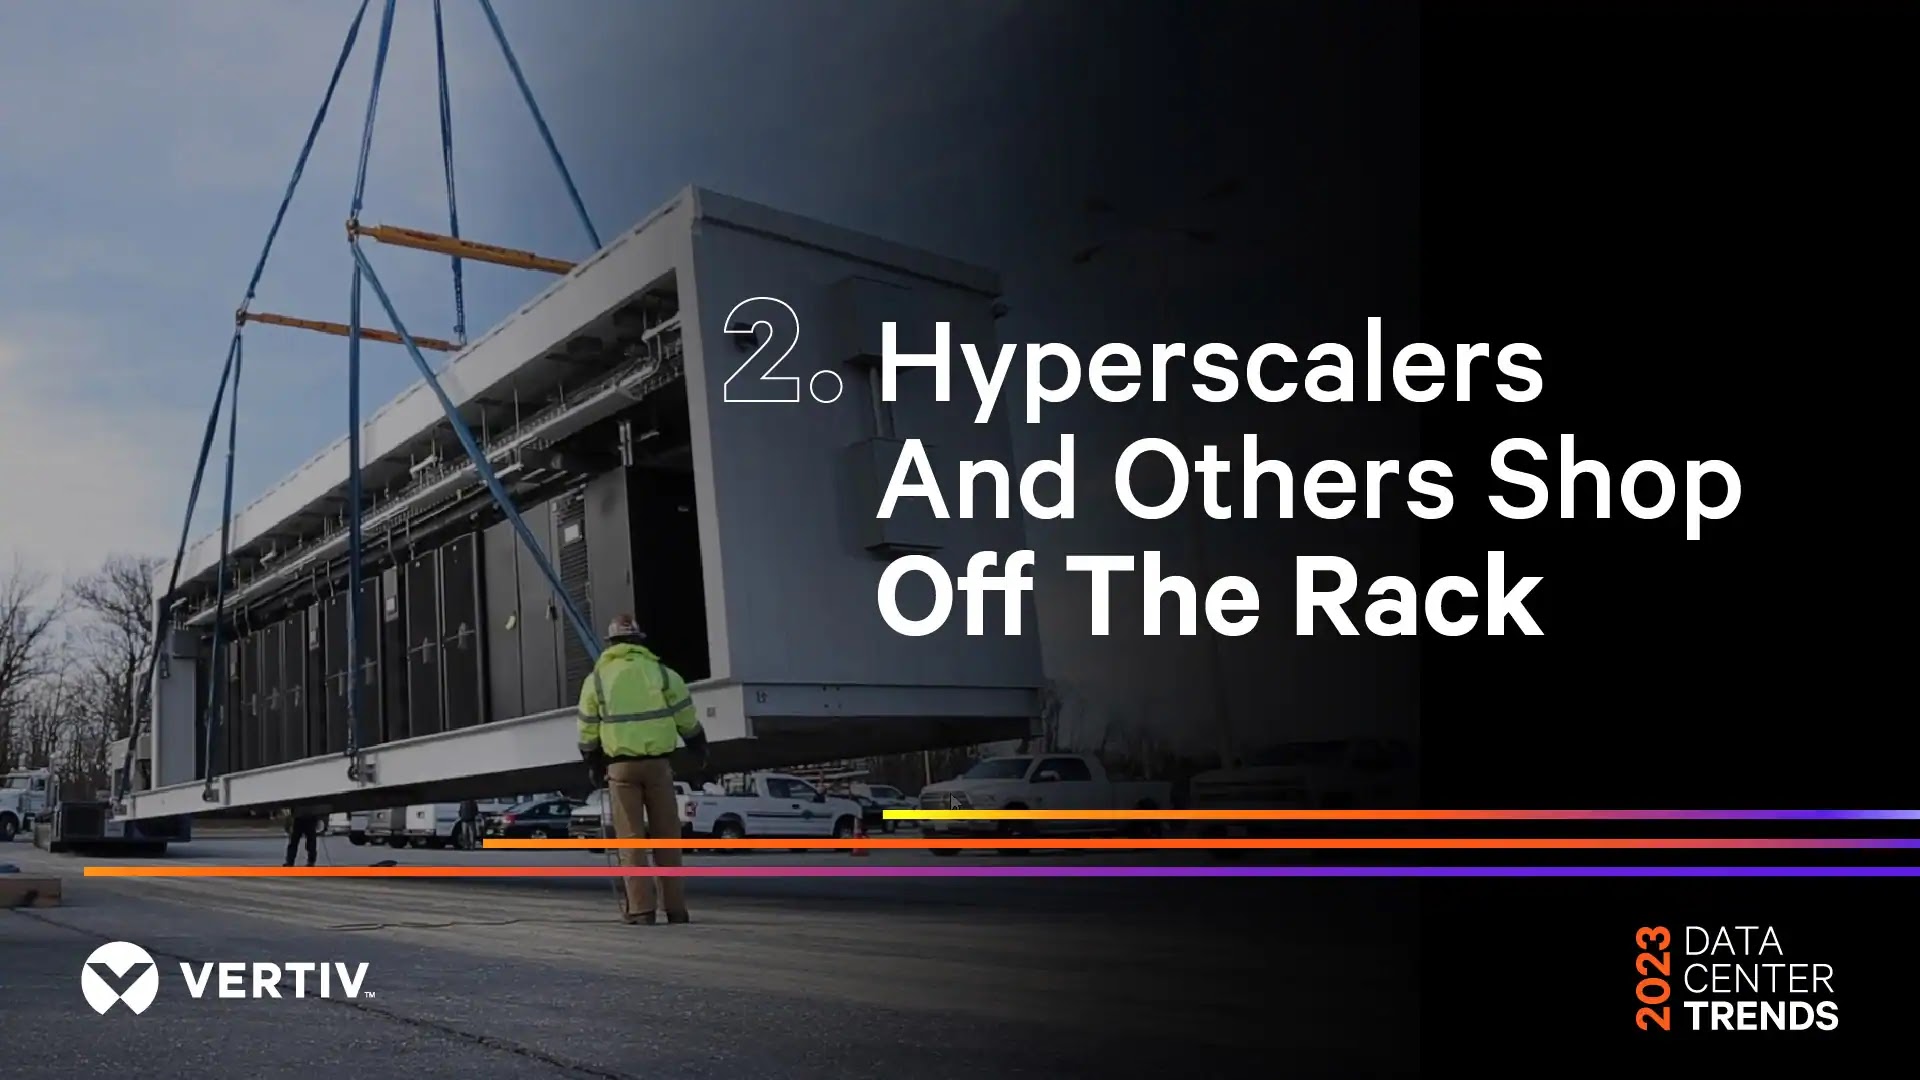 Hyperscalers and others shop off the rack